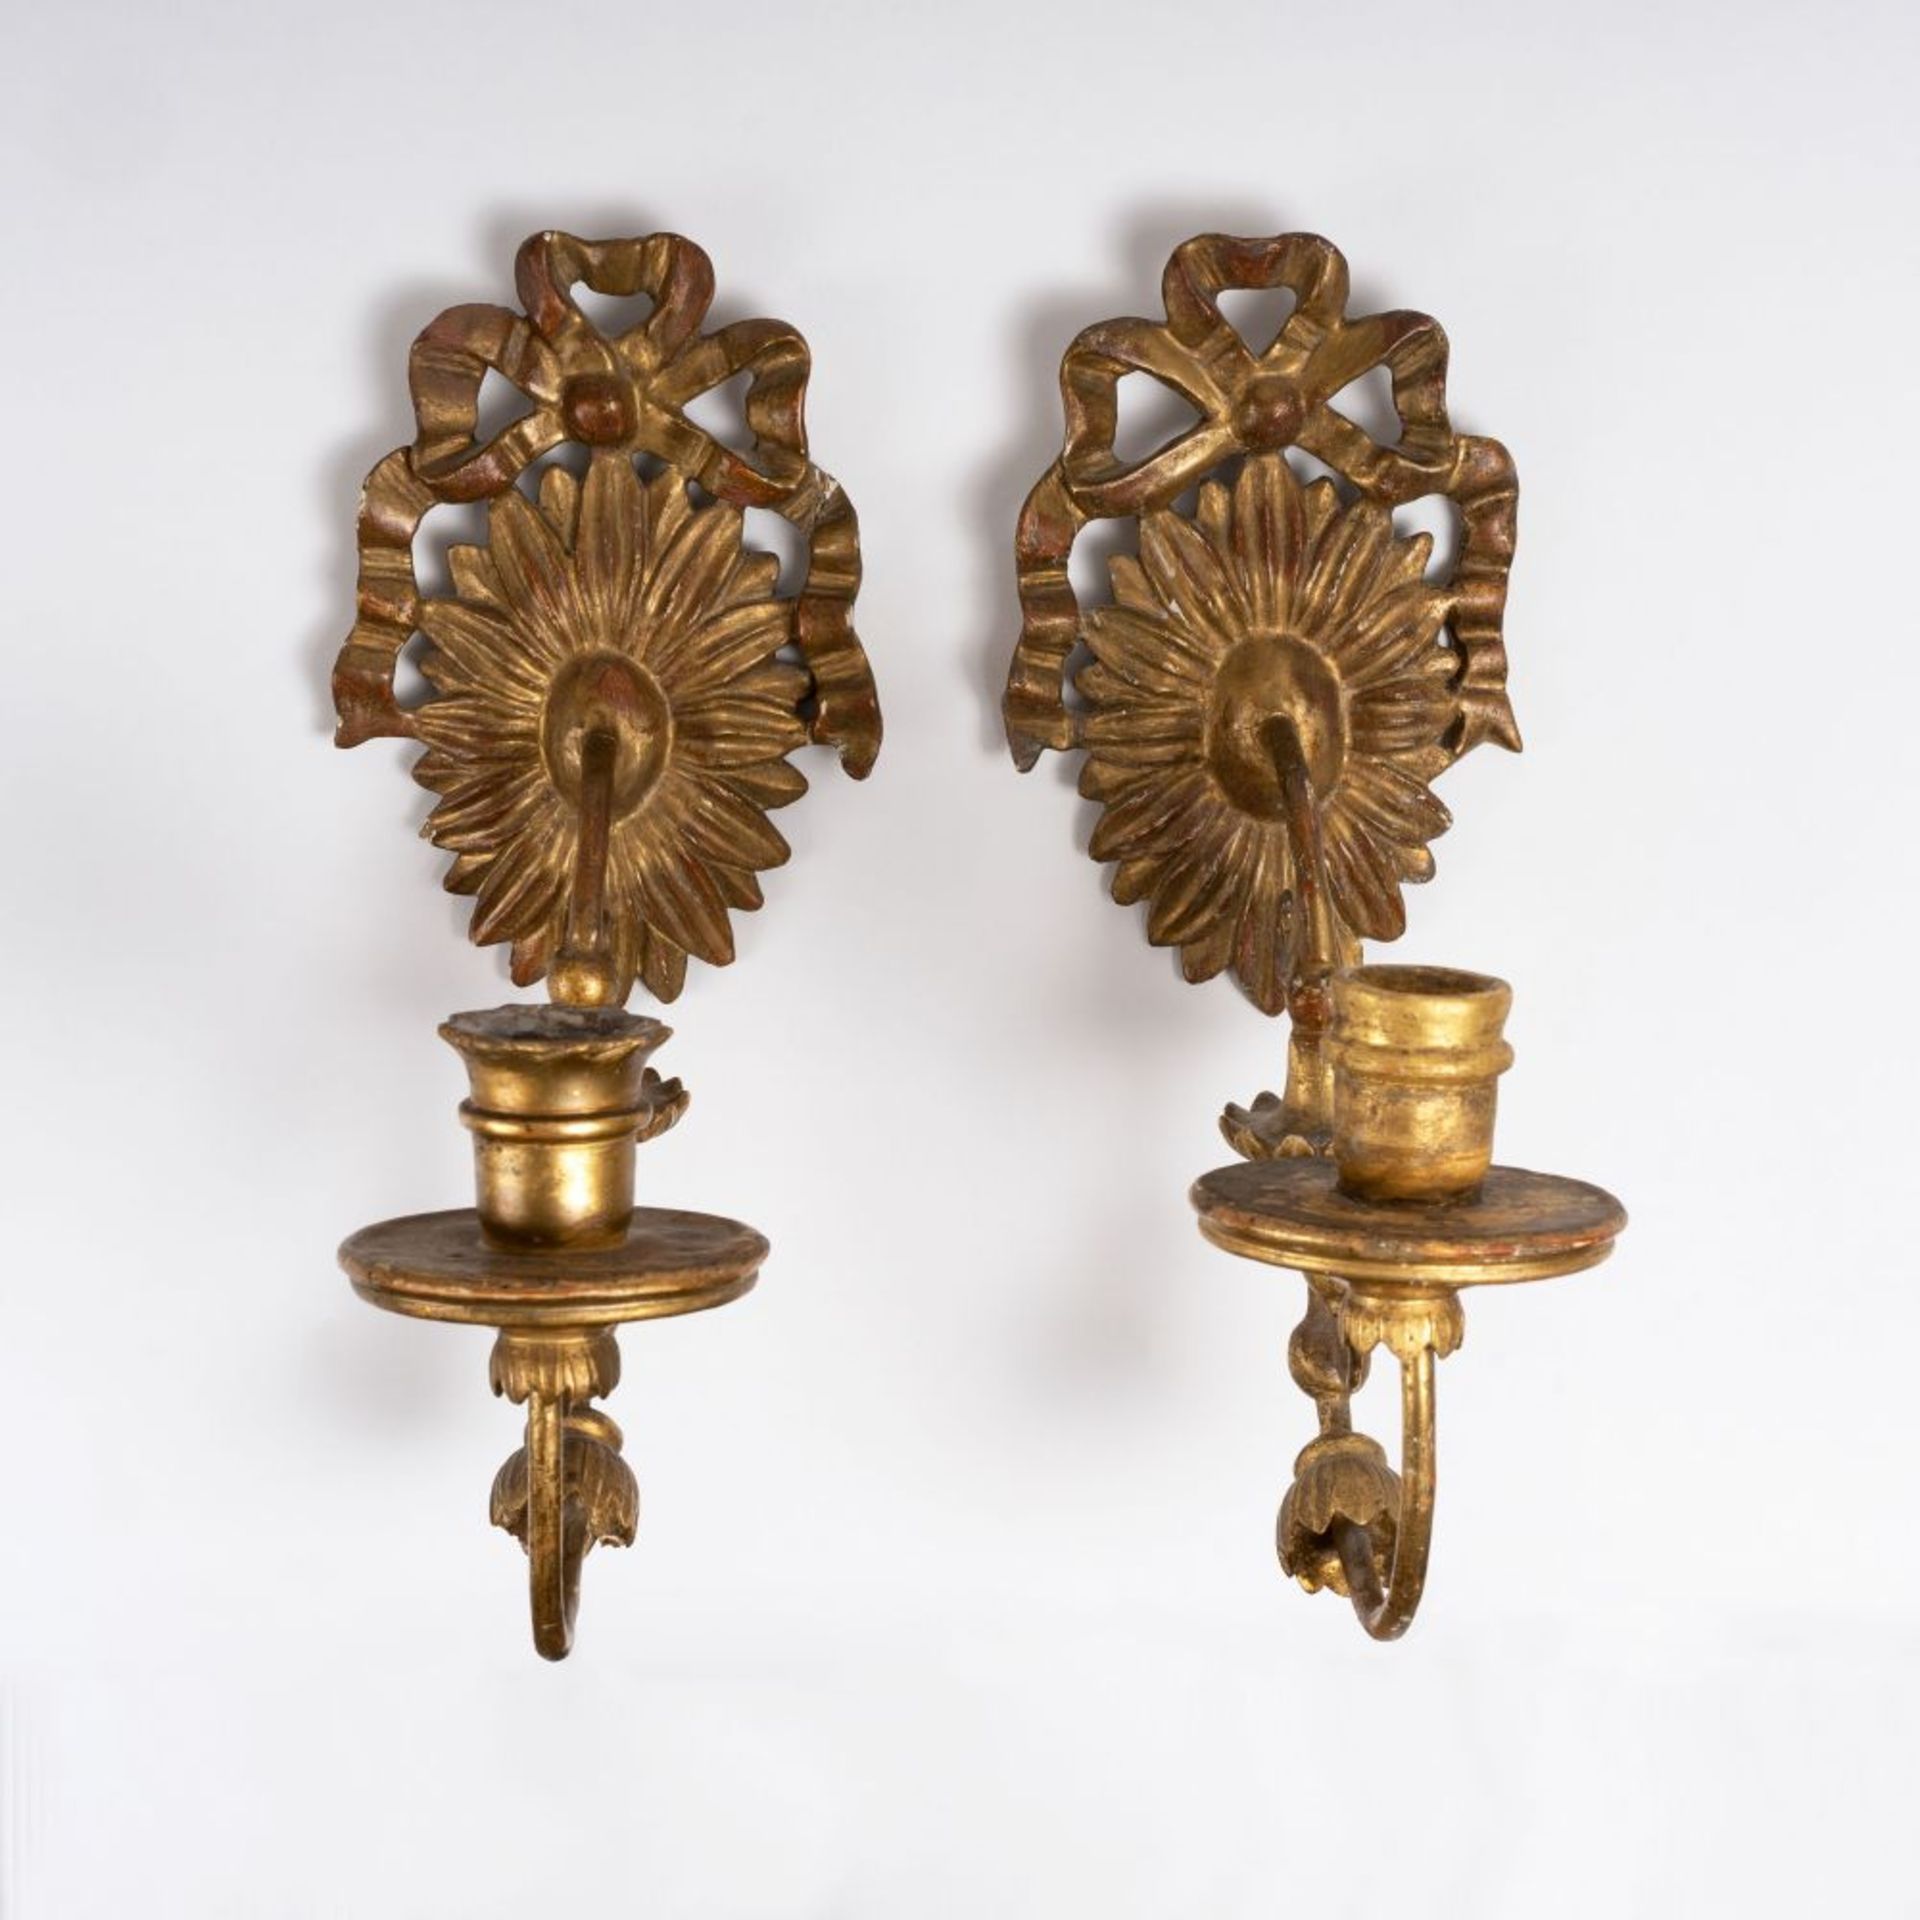 A Pair of Small Louis XVI Style Wall Lights.